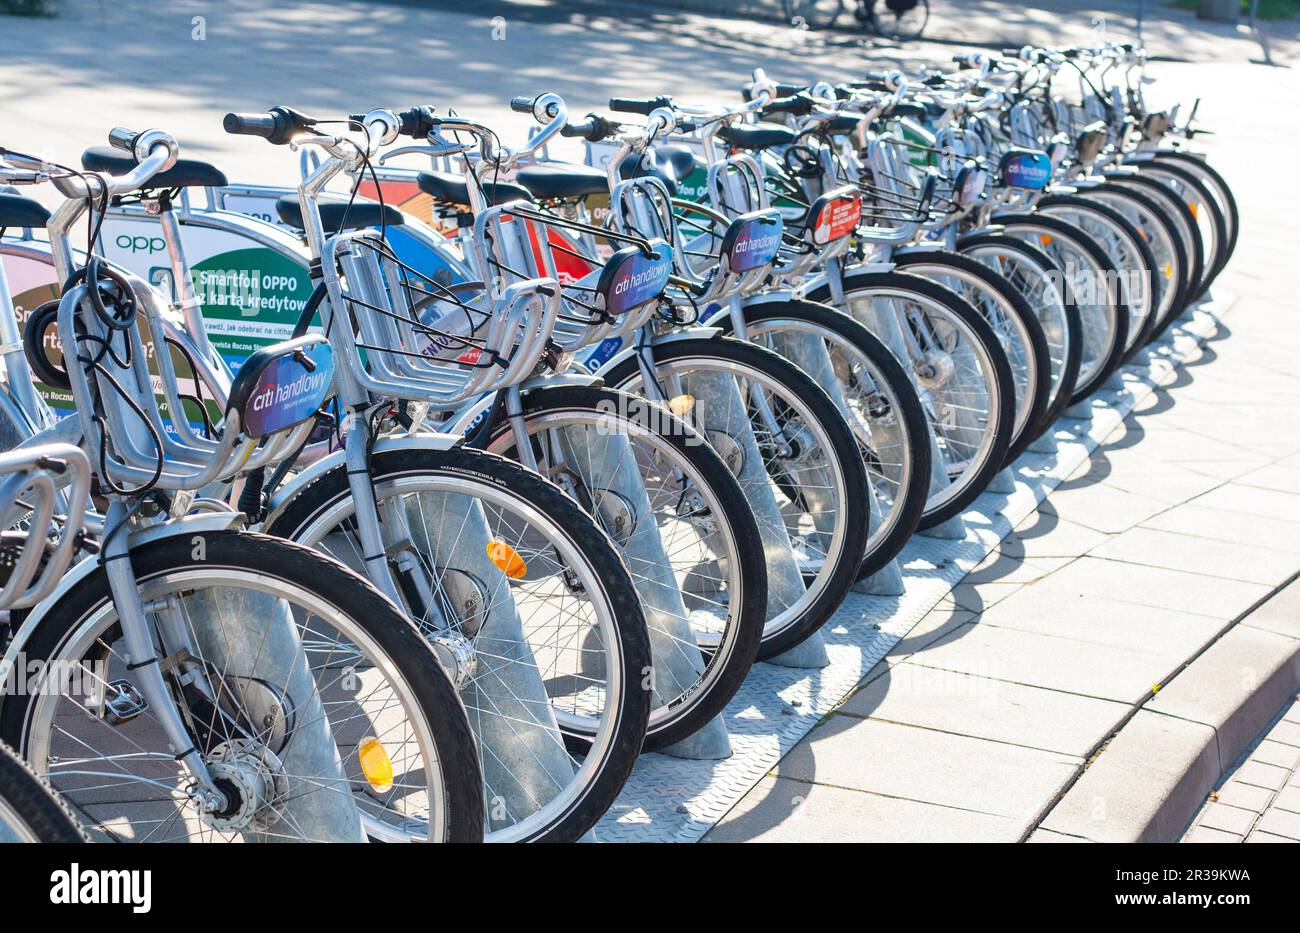 City bicycles parked in a row Stock Photo